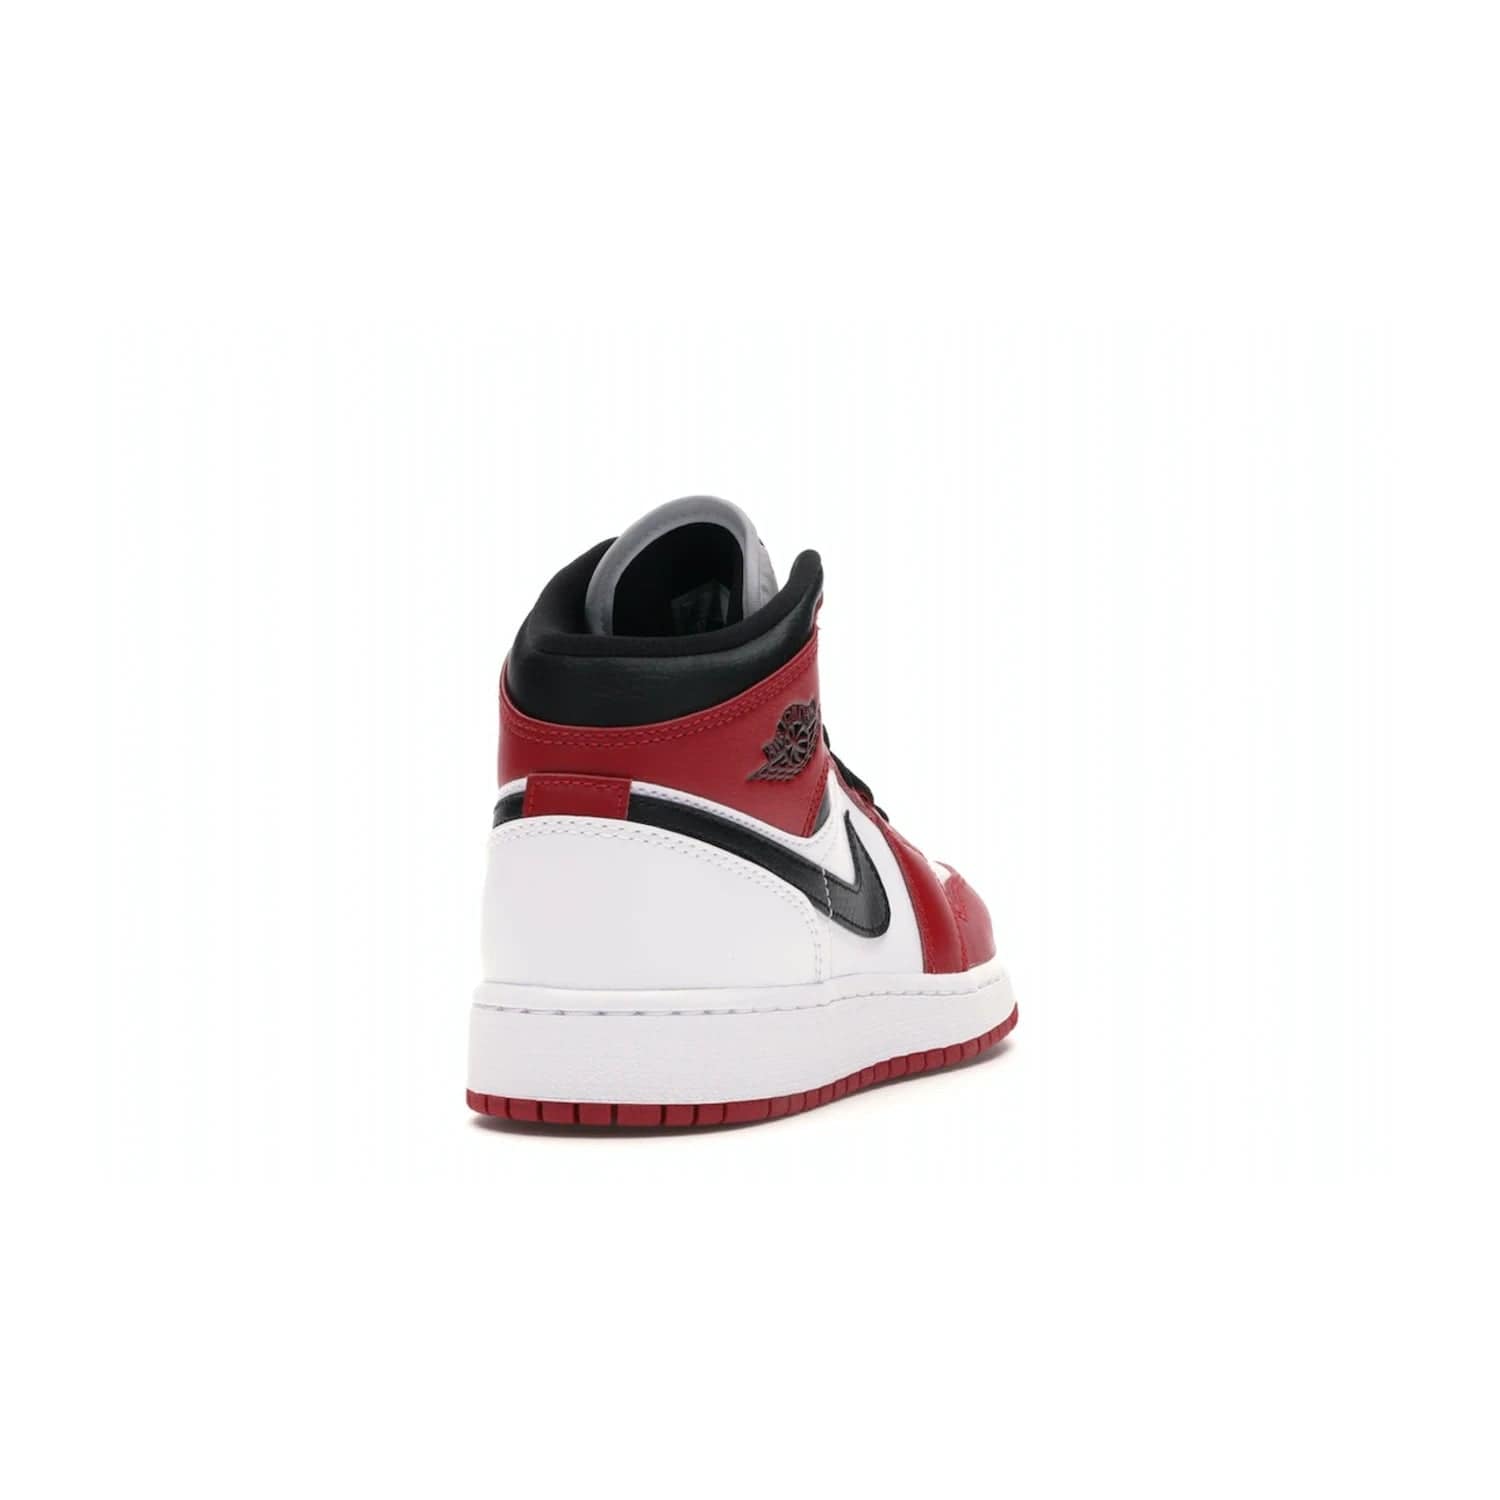 Jordan 1 Mid Chicago (2020) (GS) - Image 30 - Only at www.BallersClubKickz.com - The Kids Air Jordan 1 Mid Chicago 2020 is a stylish sneaker with classic Jordan features. White, red and black color scheme with iconic Wings and Swoosh logos, padded ankle support, white midsole with Air tech and black cotton laces. Sure to become an instant classic. July 2020 release.